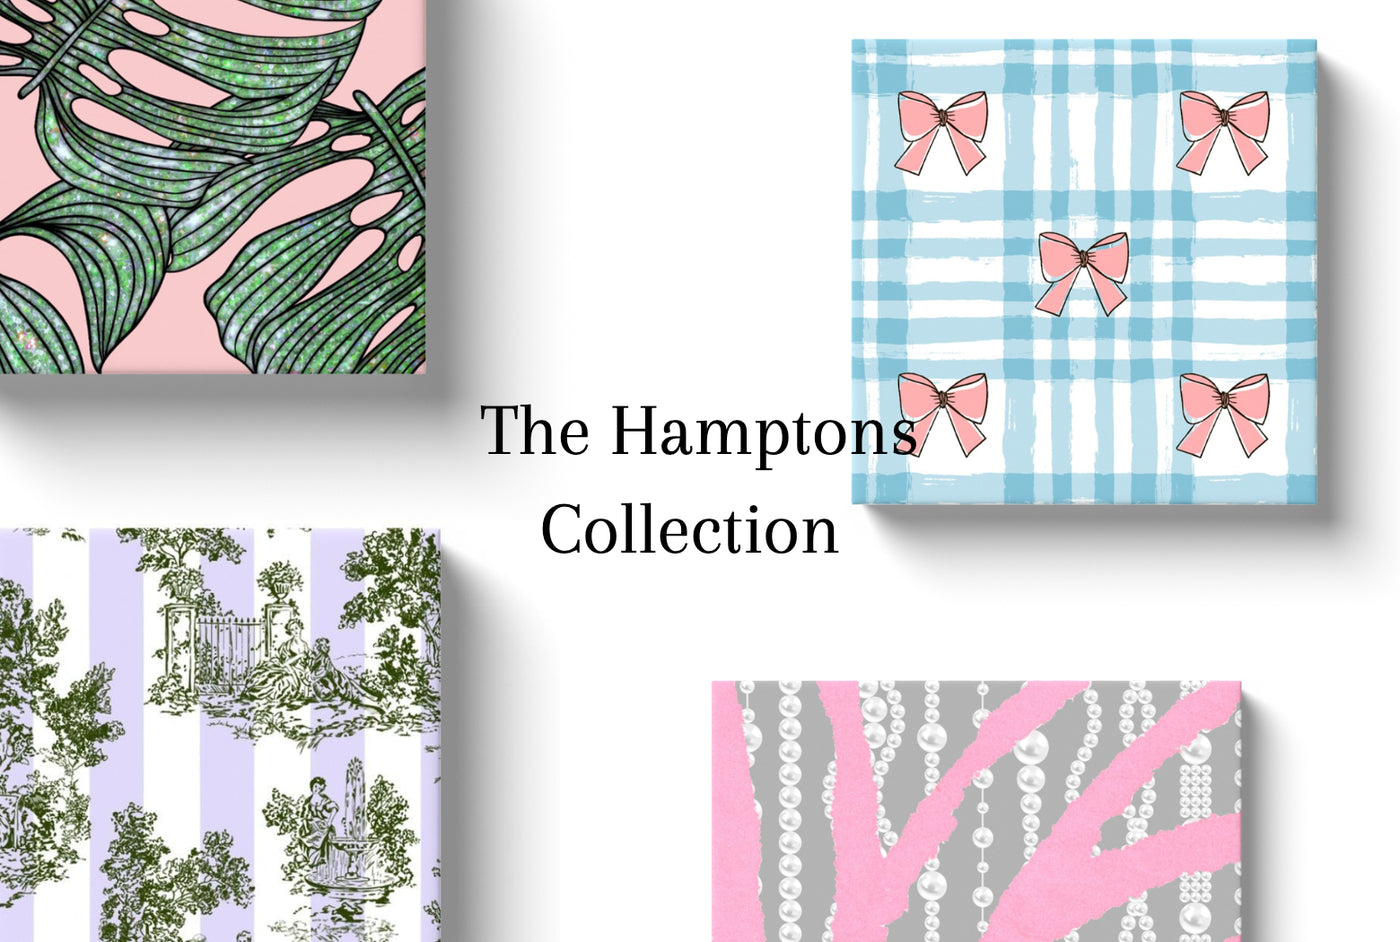 The Hamptons Collection